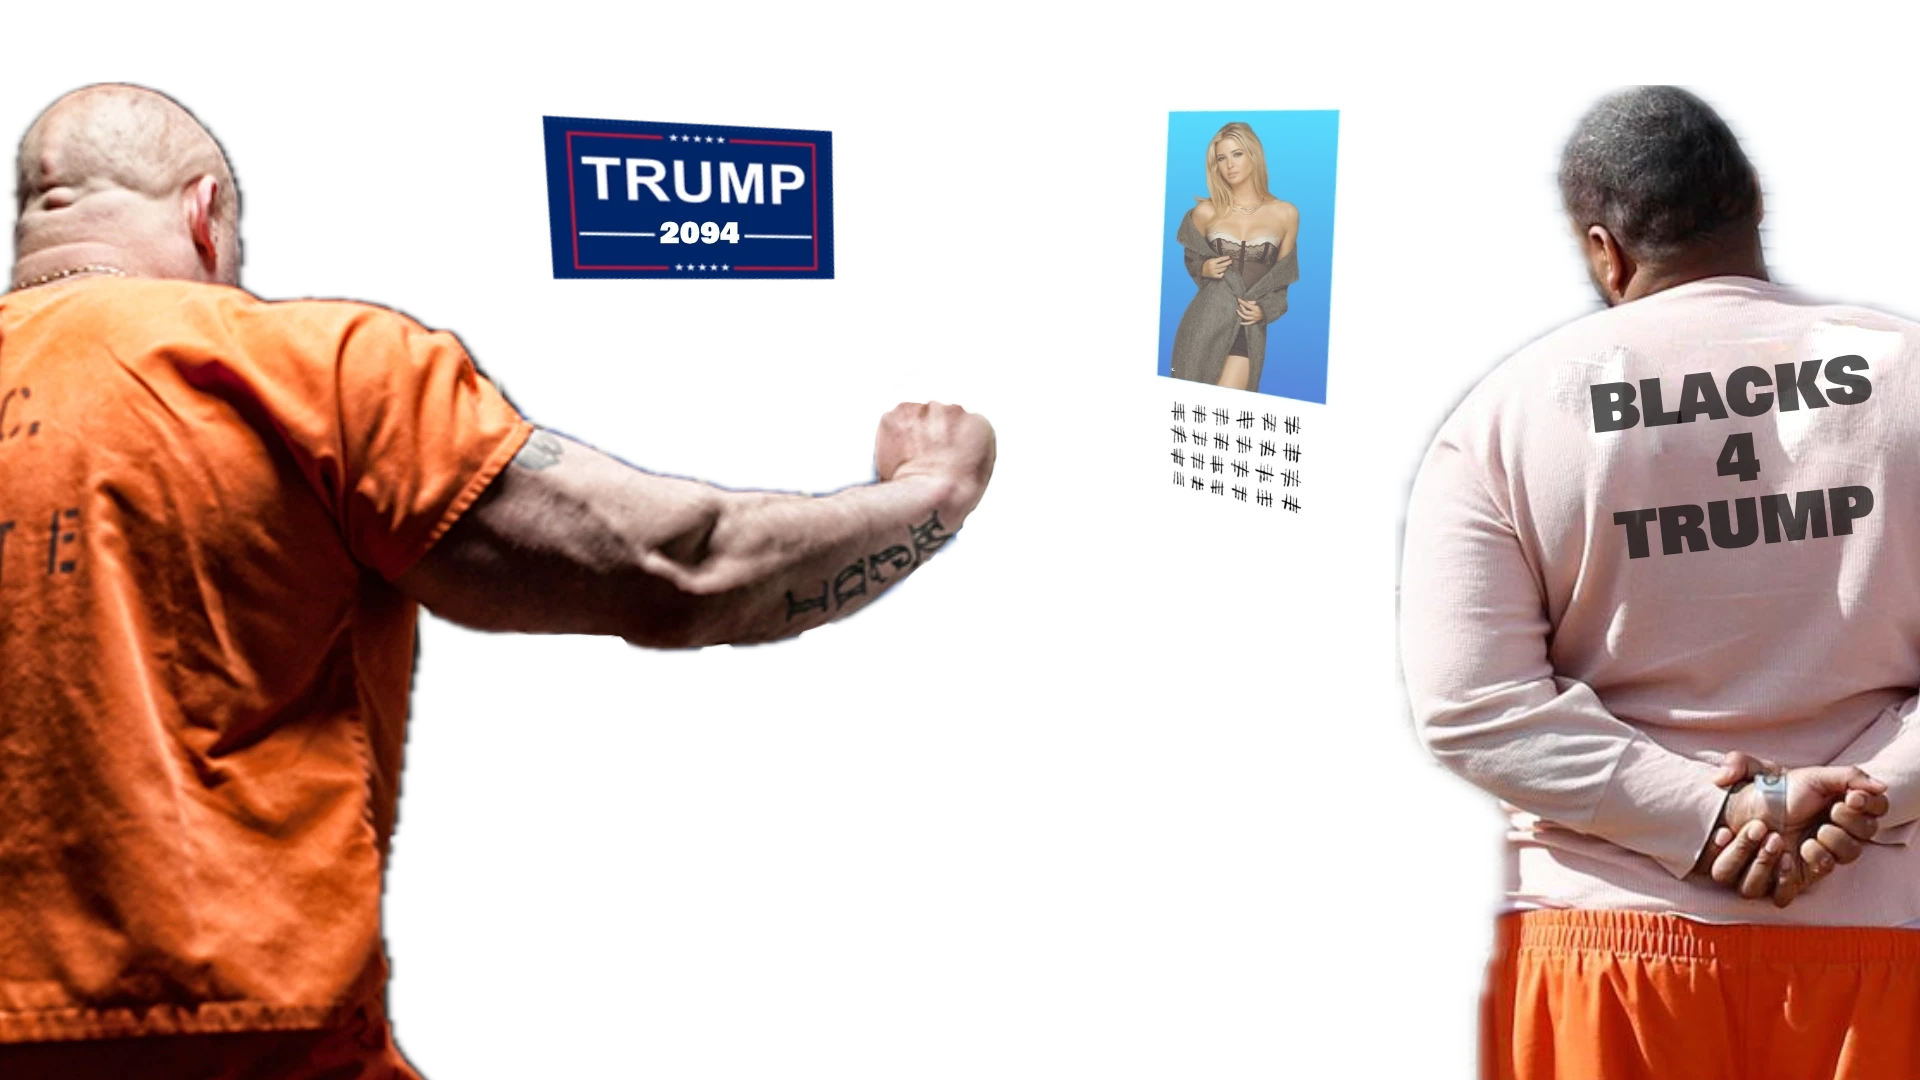 Watch Trump meets his cell mates - image